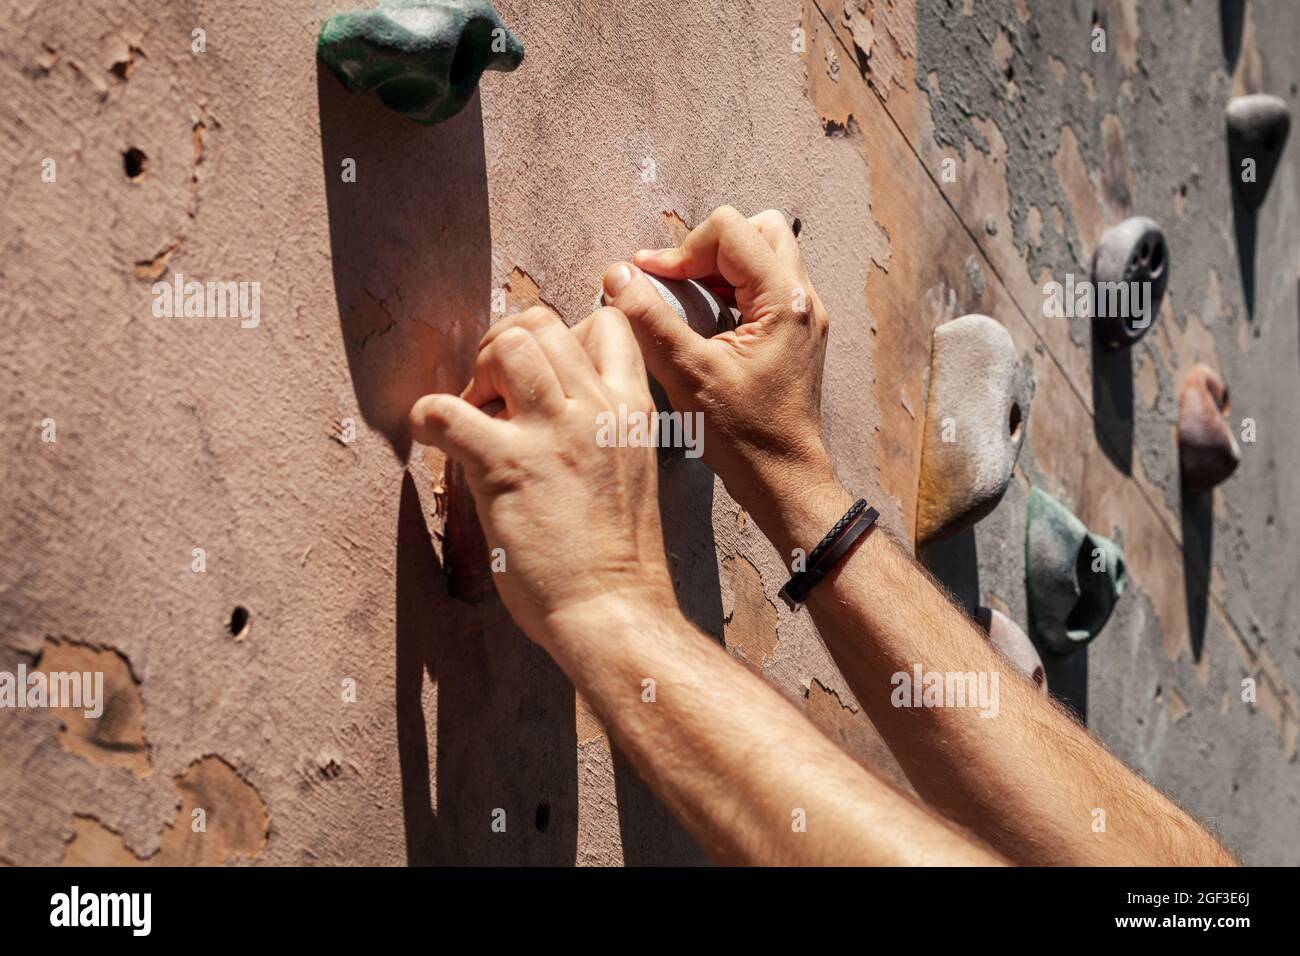 Close-up photo of male hands gripping climbing holds on worn wall outside. Man doing climbing exercise on artificial rock climbing wall at park. Stock Photo